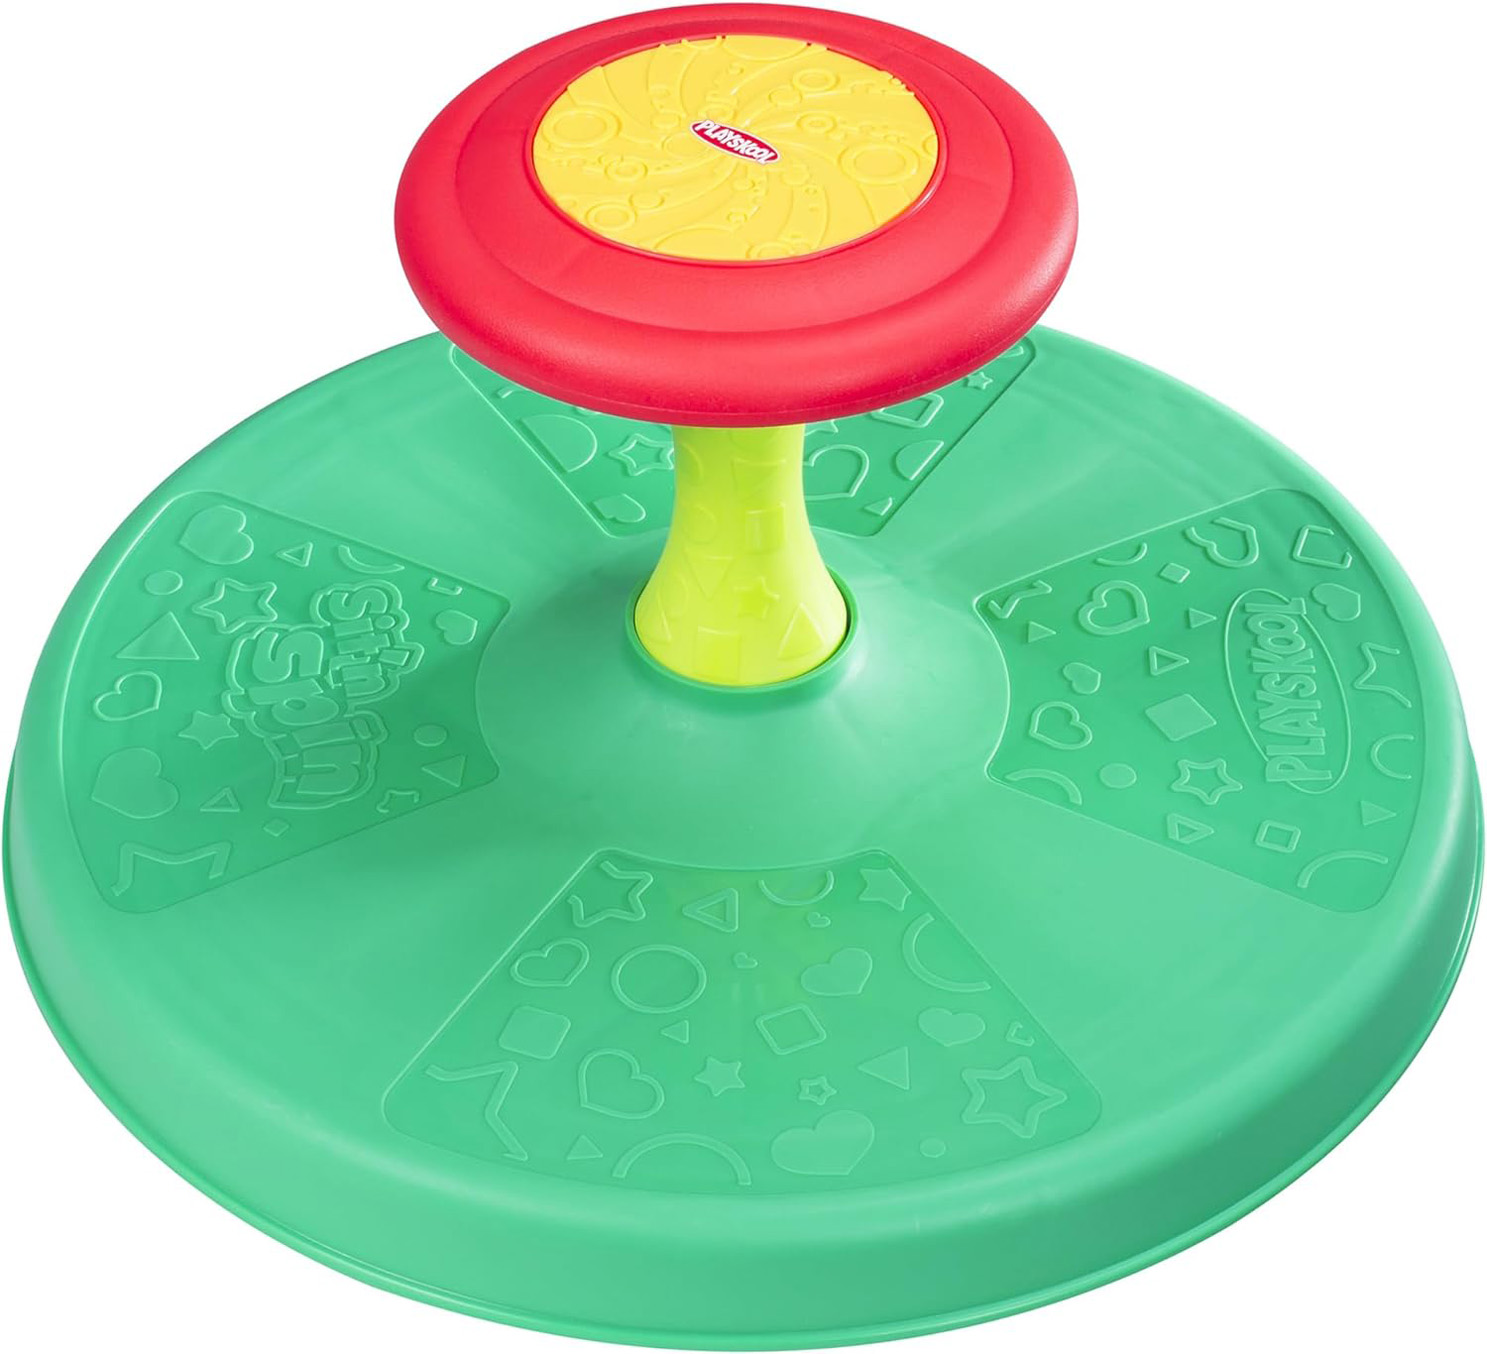 Playskool Sit ‘n Spin Classic Spinning Activity Toy for Toddlers Age Multicolor